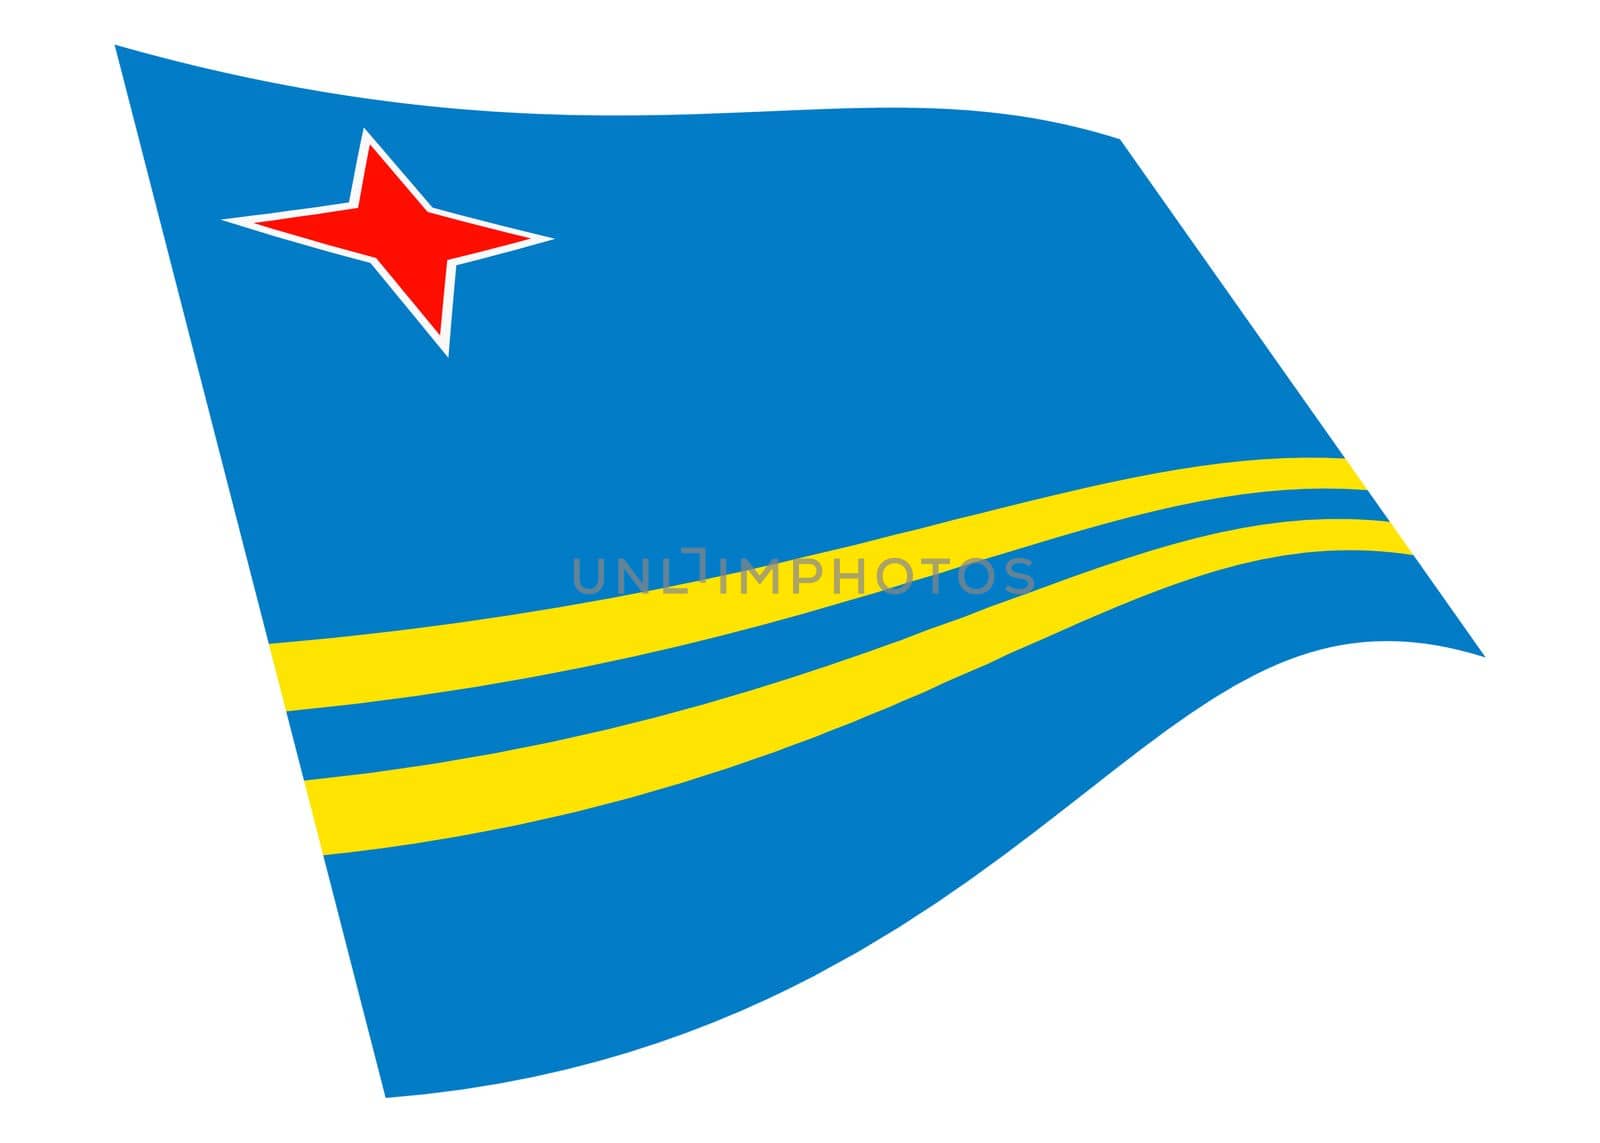 An Aruba waving flag 3d illustration isolated on white with clipping path